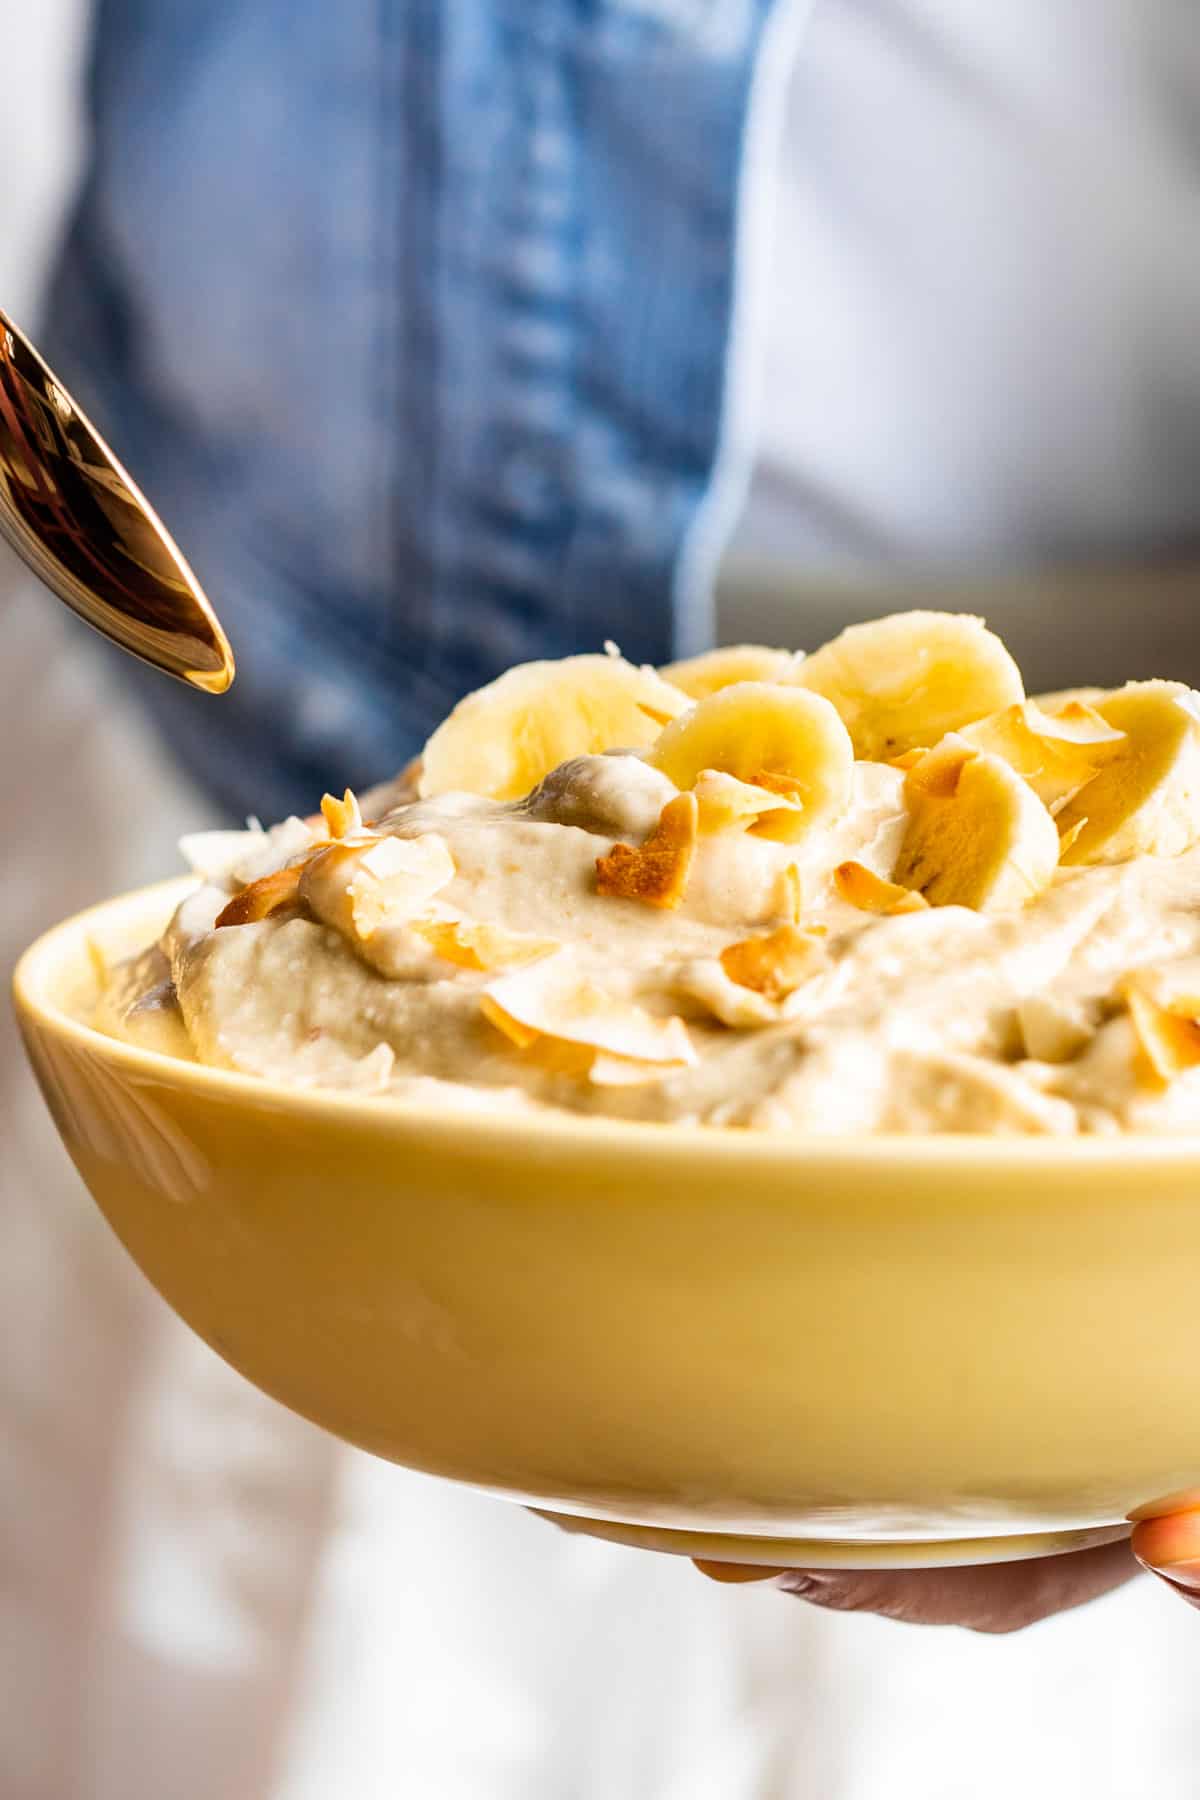 Close view of a yellow bowl filled with Creamy Coconut Banana Nice Cream with a gold spoon dipping in.